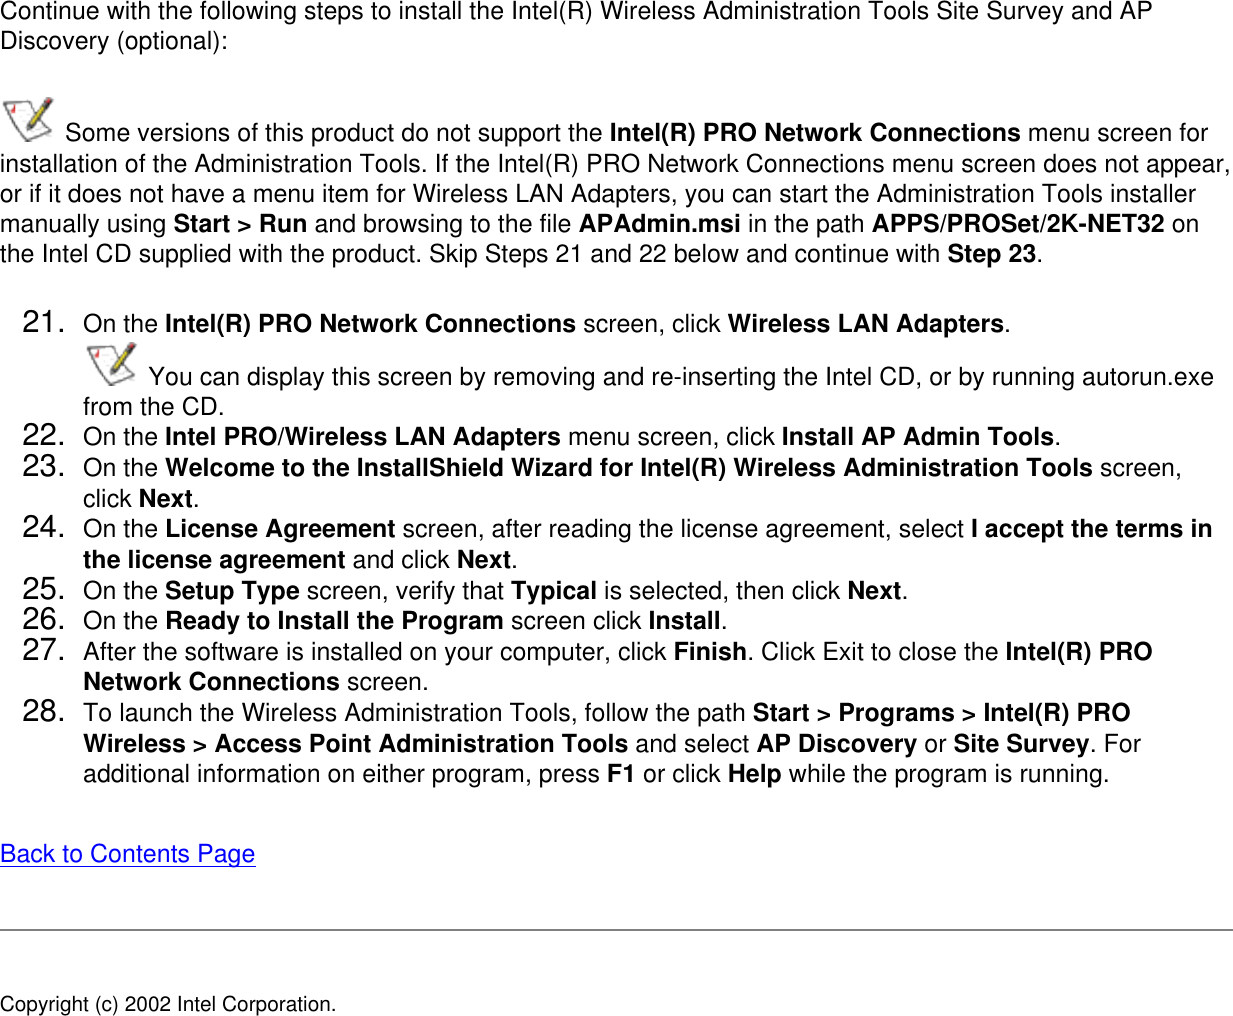 Continue with the following steps to install the Intel(R) Wireless Administration Tools Site Survey and AP Discovery (optional):  Some versions of this product do not support the Intel(R) PRO Network Connections menu screen for installation of the Administration Tools. If the Intel(R) PRO Network Connections menu screen does not appear, or if it does not have a menu item for Wireless LAN Adapters, you can start the Administration Tools installer manually using Start &gt; Run and browsing to the file APAdmin.msi in the path APPS/PROSet/2K-NET32 on the Intel CD supplied with the product. Skip Steps 21 and 22 below and continue with Step 23. 21.  On the Intel(R) PRO Network Connections screen, click Wireless LAN Adapters.  You can display this screen by removing and re-inserting the Intel CD, or by running autorun.exe from the CD.22.  On the Intel PRO/Wireless LAN Adapters menu screen, click Install AP Admin Tools.23.  On the Welcome to the InstallShield Wizard for Intel(R) Wireless Administration Tools screen, click Next. 24.  On the License Agreement screen, after reading the license agreement, select I accept the terms in the license agreement and click Next. 25.  On the Setup Type screen, verify that Typical is selected, then click Next.26.  On the Ready to Install the Program screen click Install.27.  After the software is installed on your computer, click Finish. Click Exit to close the Intel(R) PRO Network Connections screen.28.  To launch the Wireless Administration Tools, follow the path Start &gt; Programs &gt; Intel(R) PRO Wireless &gt; Access Point Administration Tools and select AP Discovery or Site Survey. For additional information on either program, press F1 or click Help while the program is running. Back to Contents Page Copyright (c) 2002 Intel Corporation. 